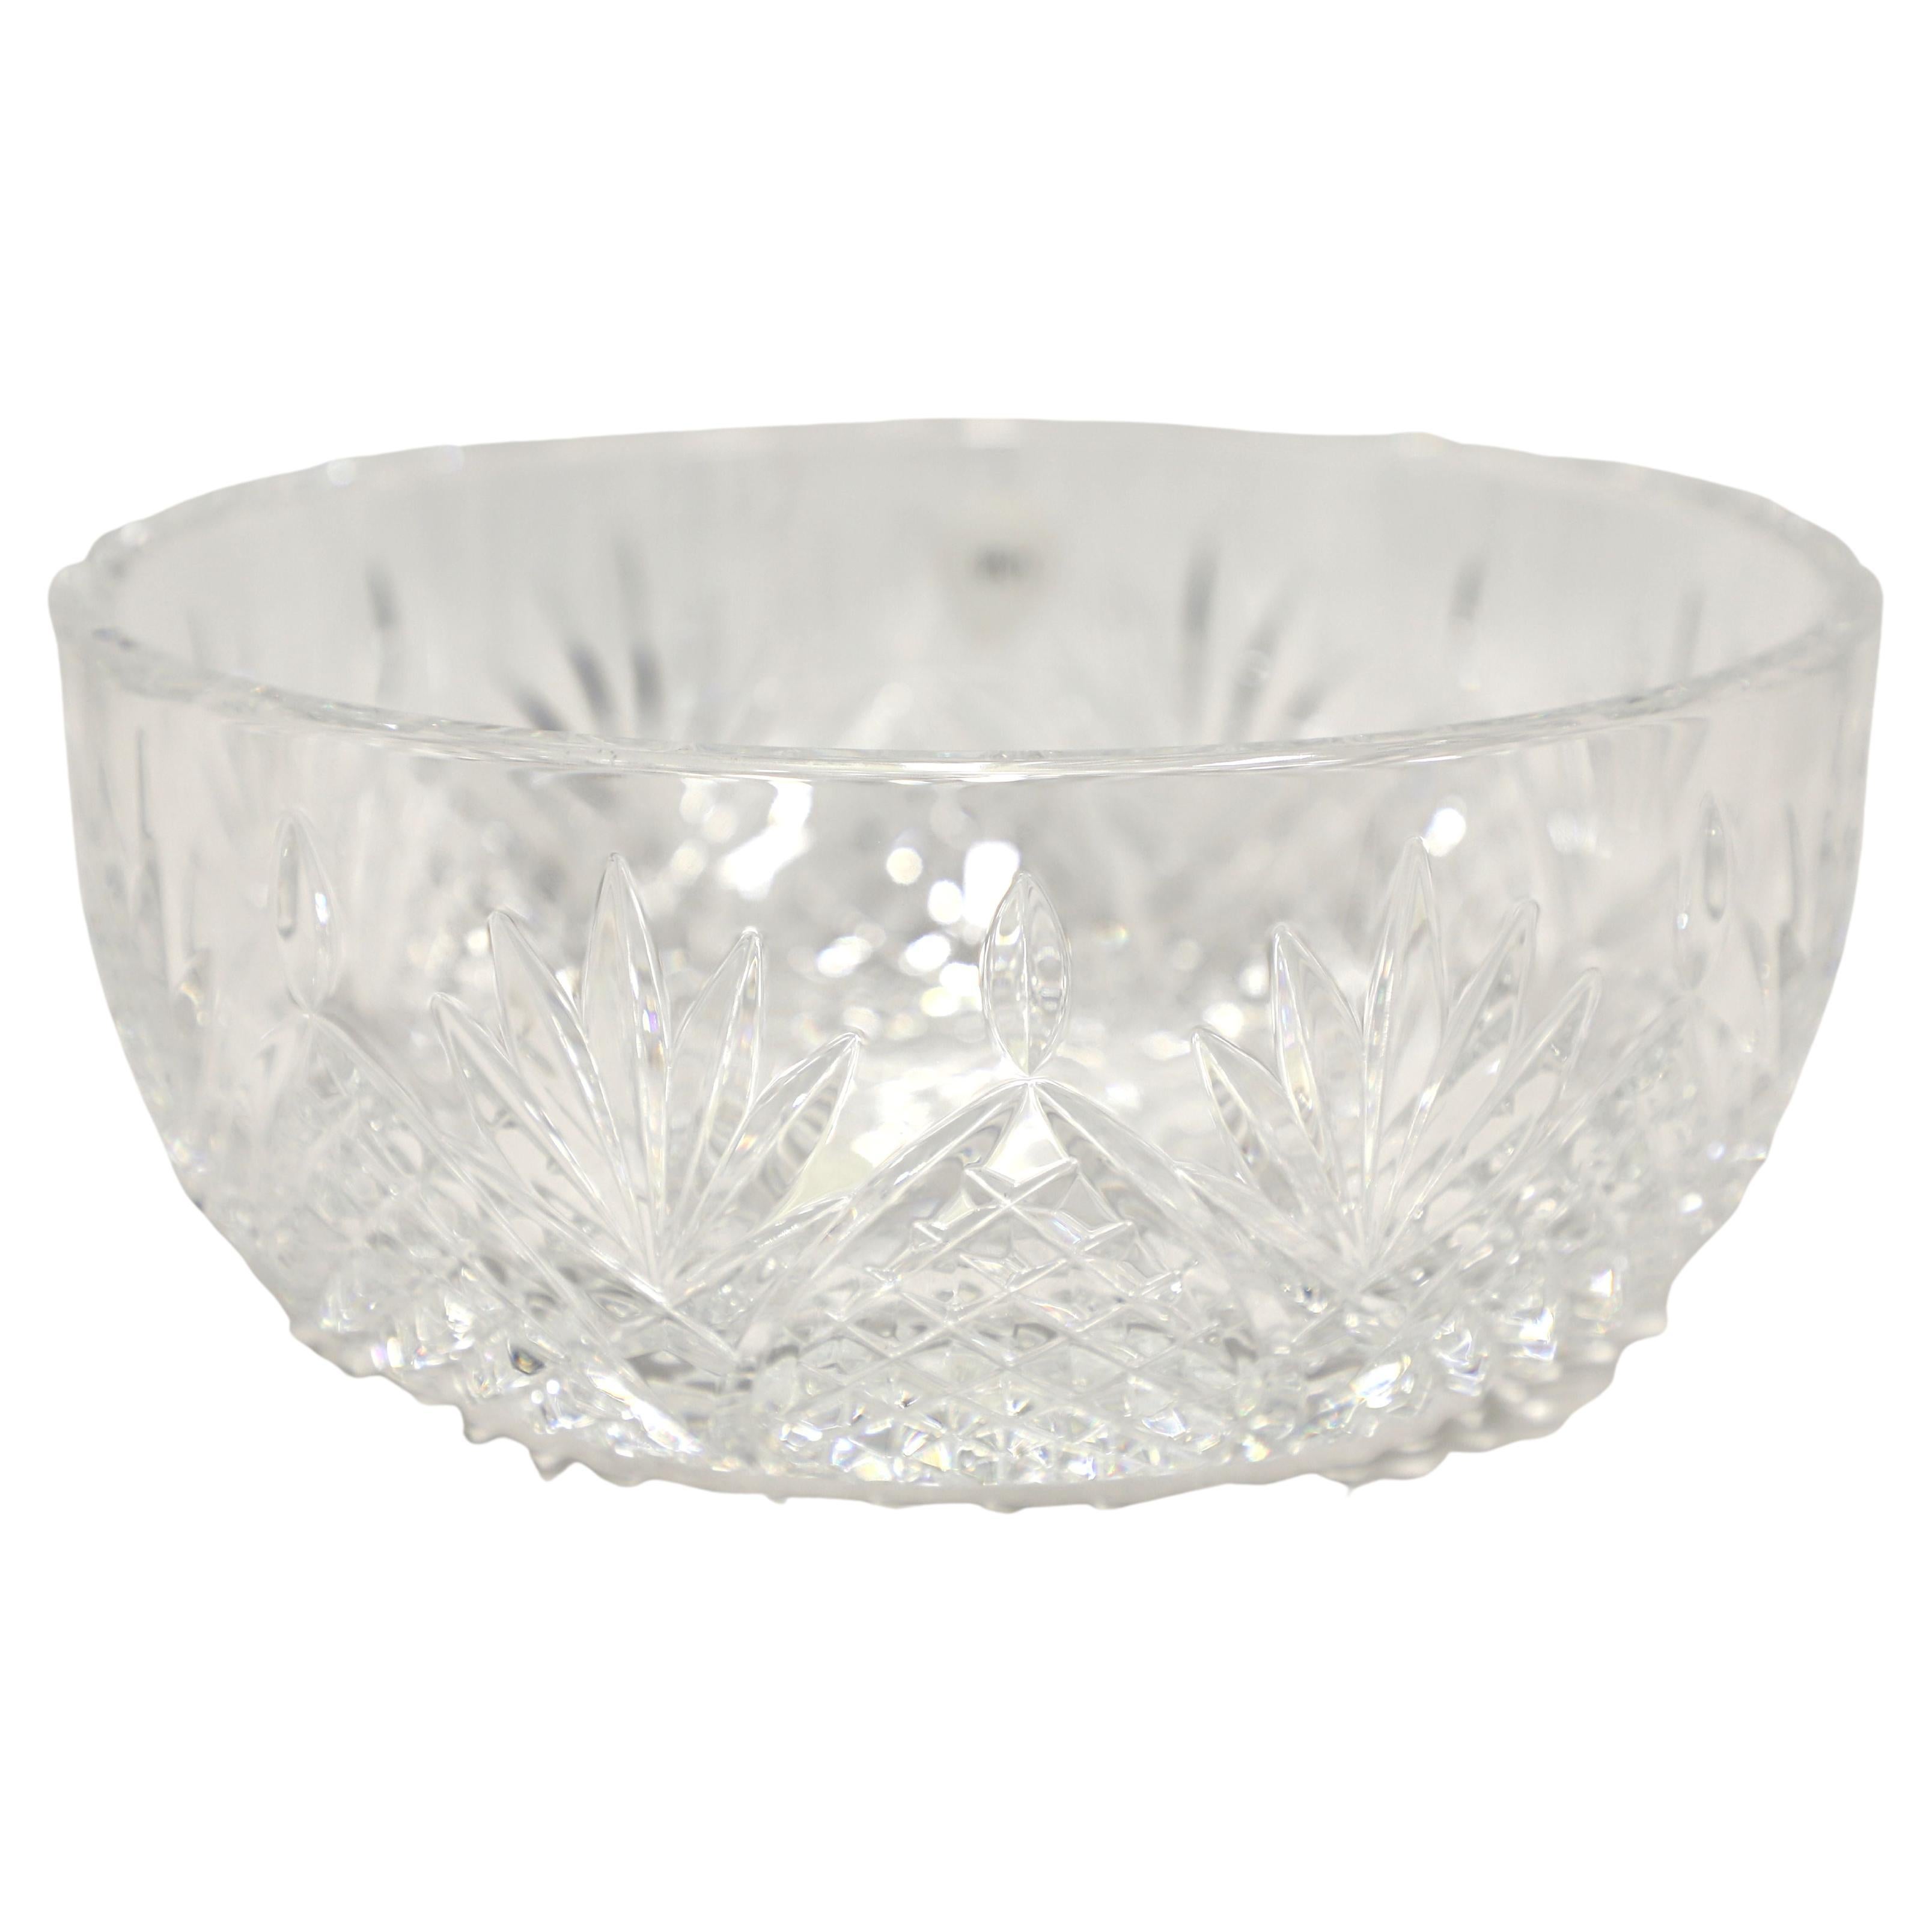 WATERFORD Crystal Ireland 8" Viking Triangle Bowl *New in Open Box* For Sale